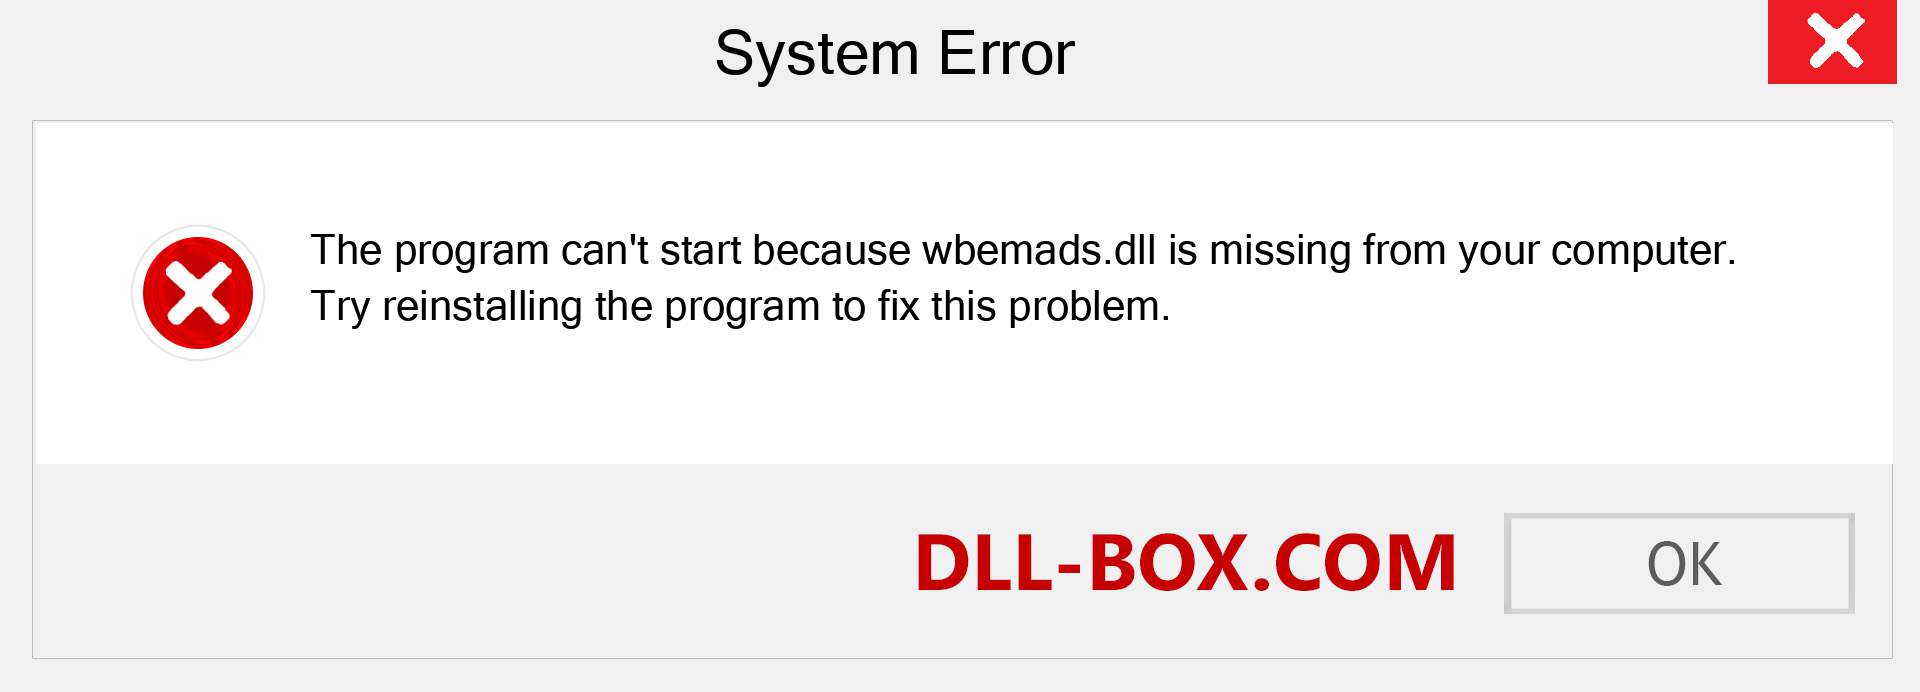  wbemads.dll file is missing?. Download for Windows 7, 8, 10 - Fix  wbemads dll Missing Error on Windows, photos, images